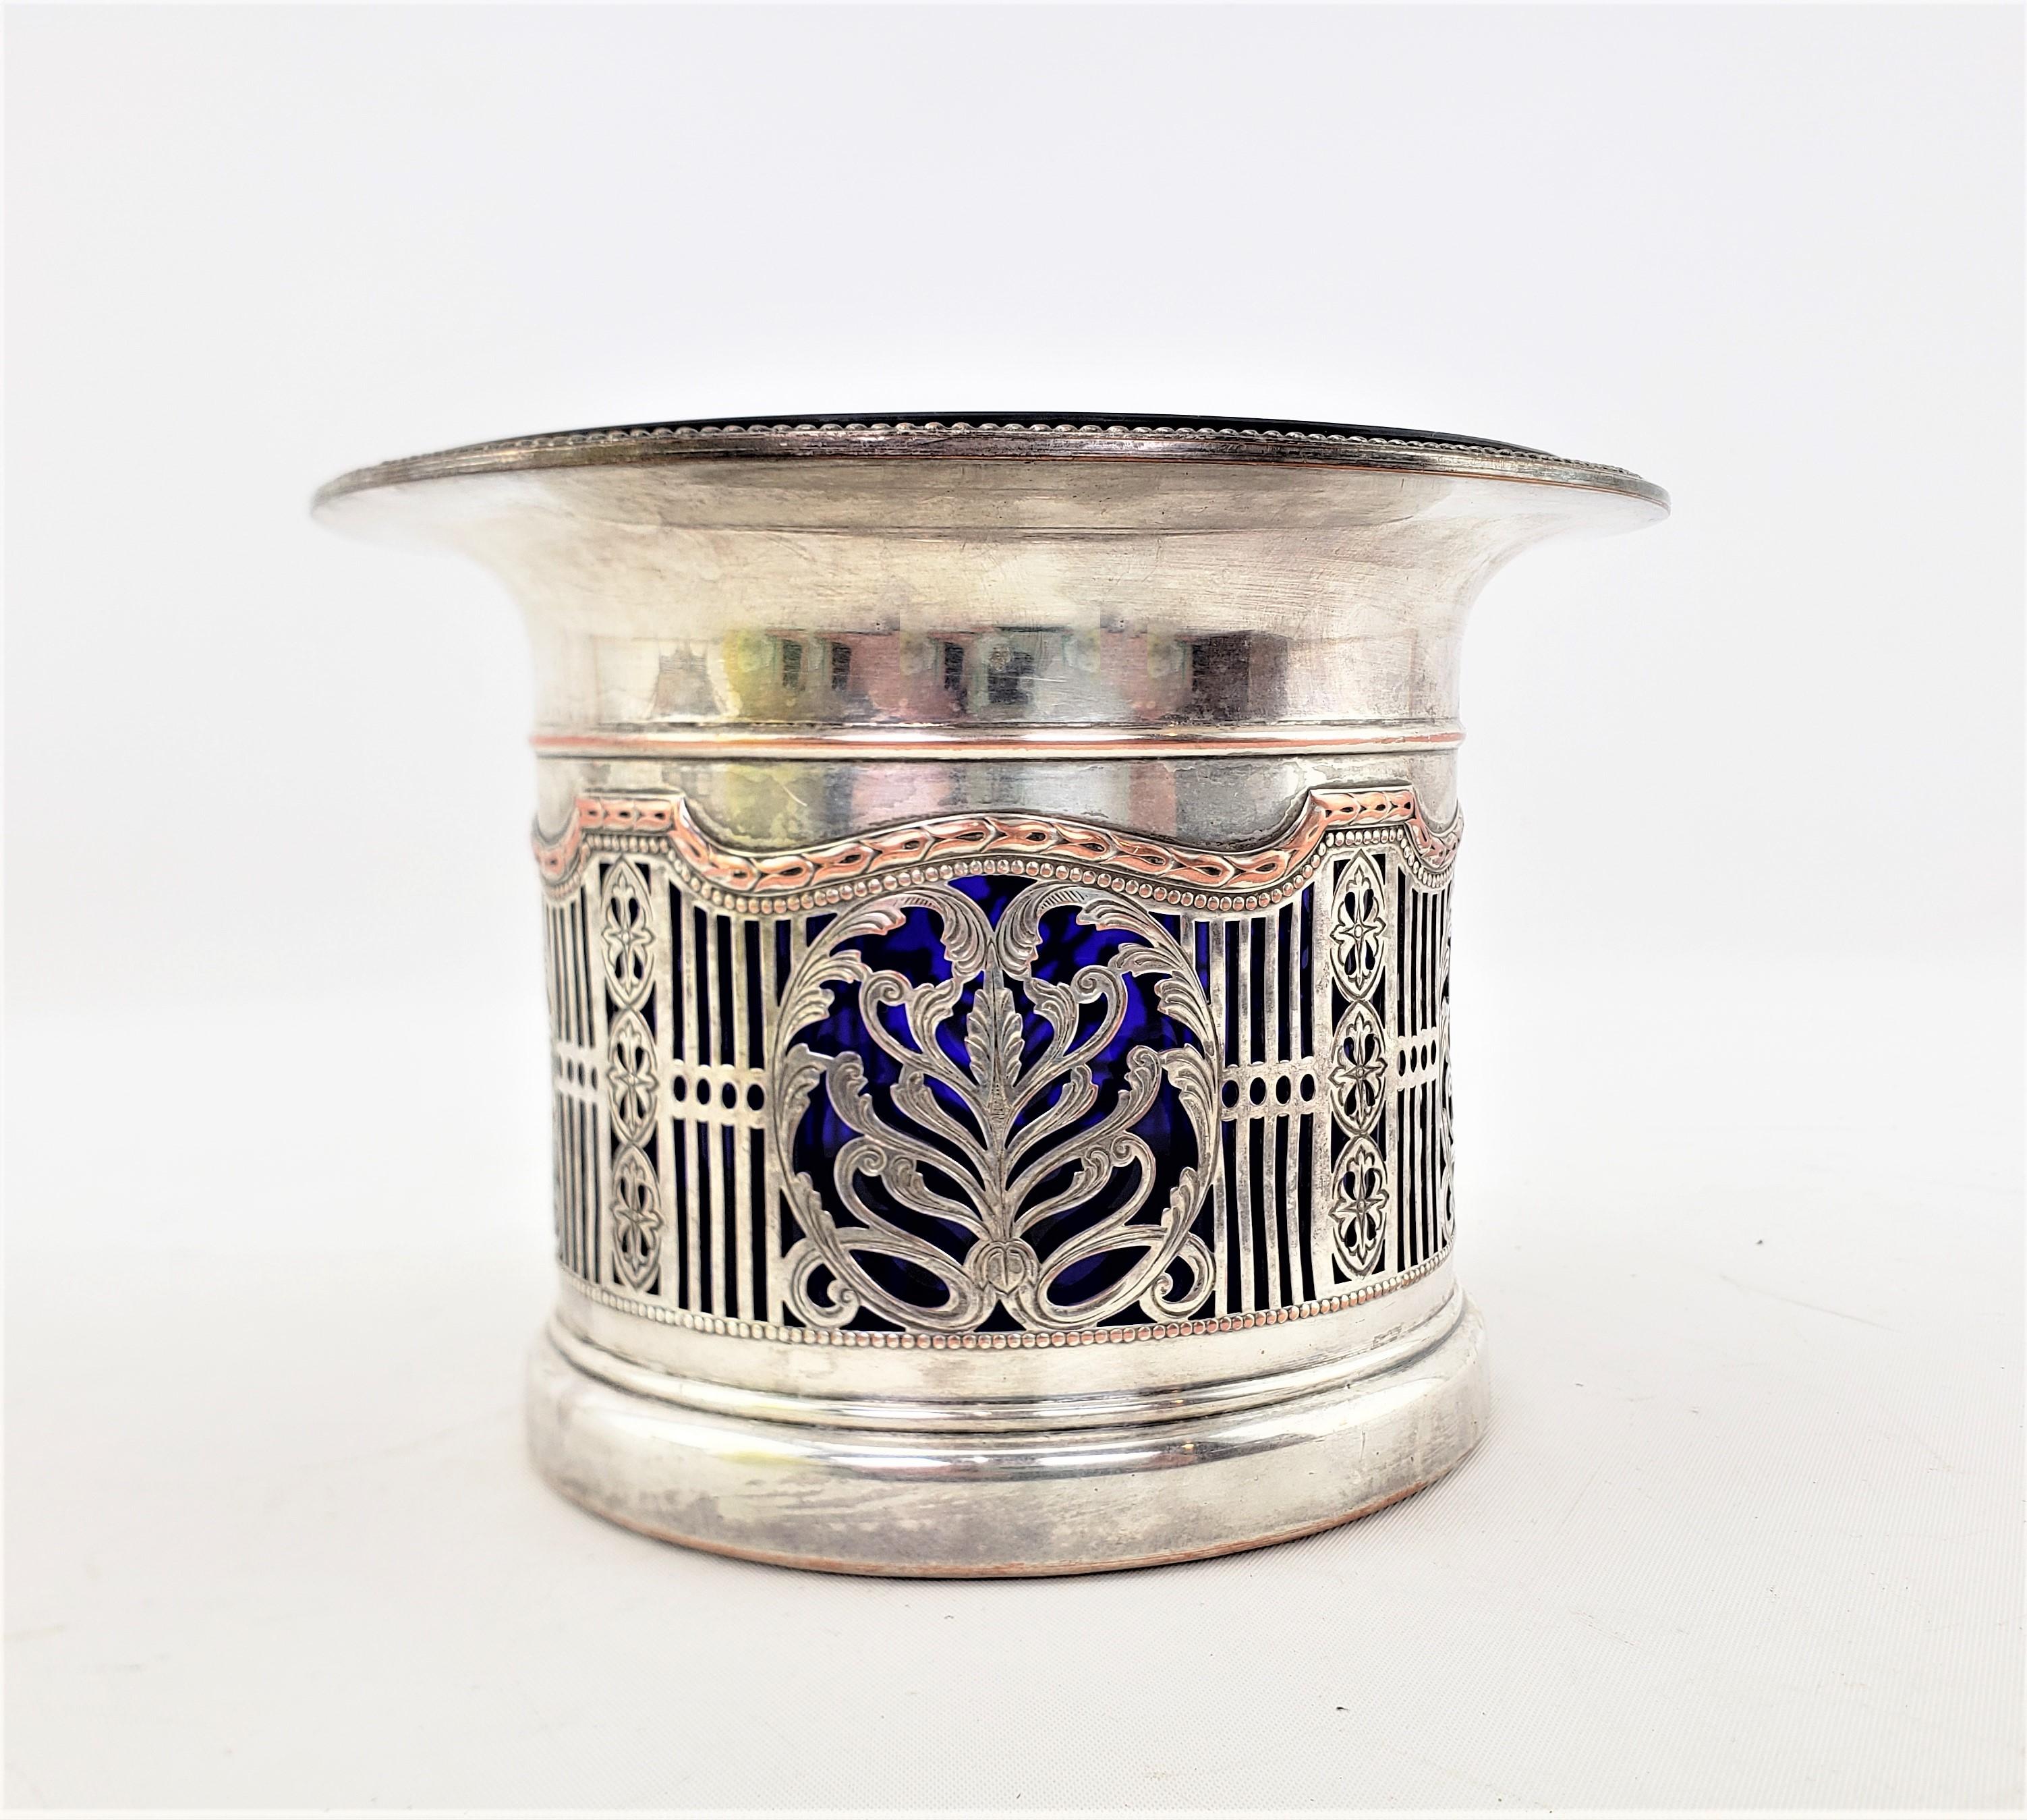 This antique lined bottle coaster is unsigned, but presumed to have originated from England and date to approximately 1890 and done in the period Art Nouveau style. This bottle coaster is composed of silver plate with pierced sides with stylized